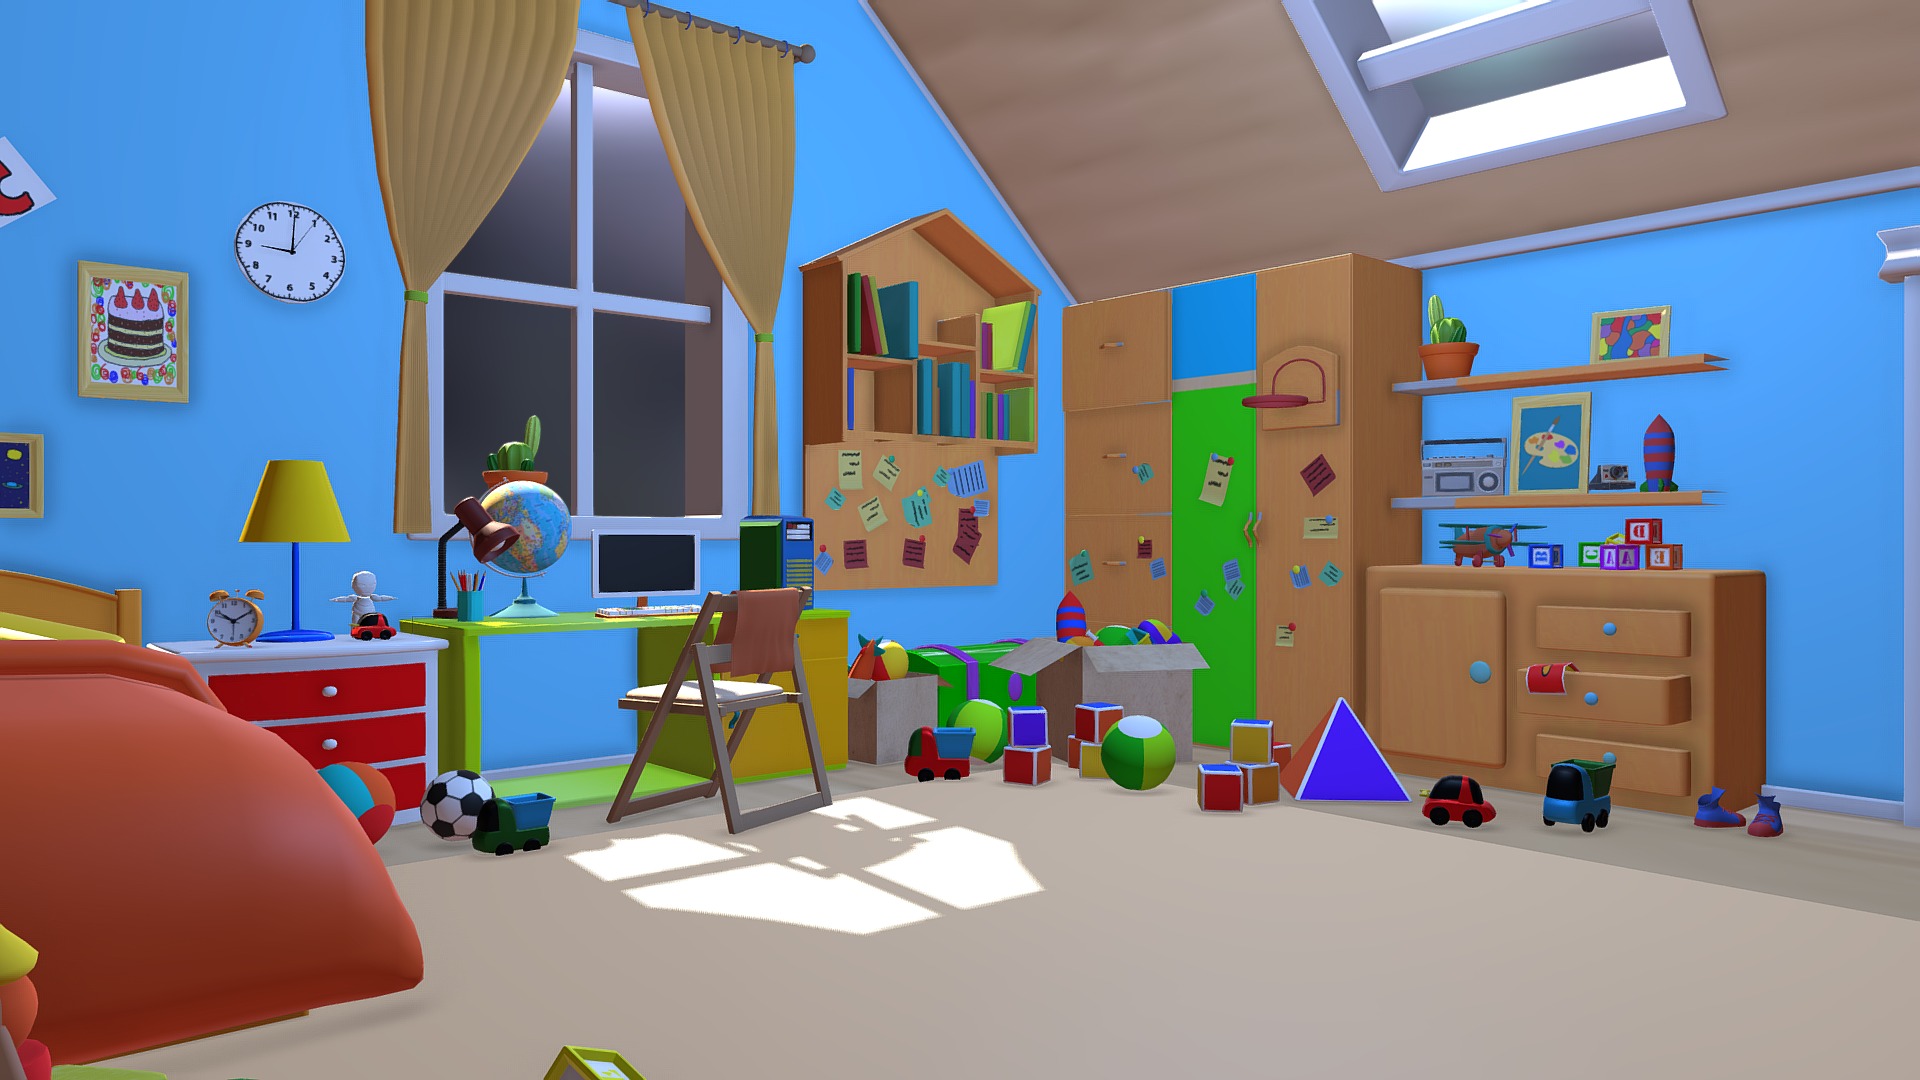 3D model Asset – Cartoons – Bedroom- 02 3D model - This is a 3D model of the Asset - Cartoons - Bedroom- 02 3D model. The 3D model is about a room with a playroom and toys.